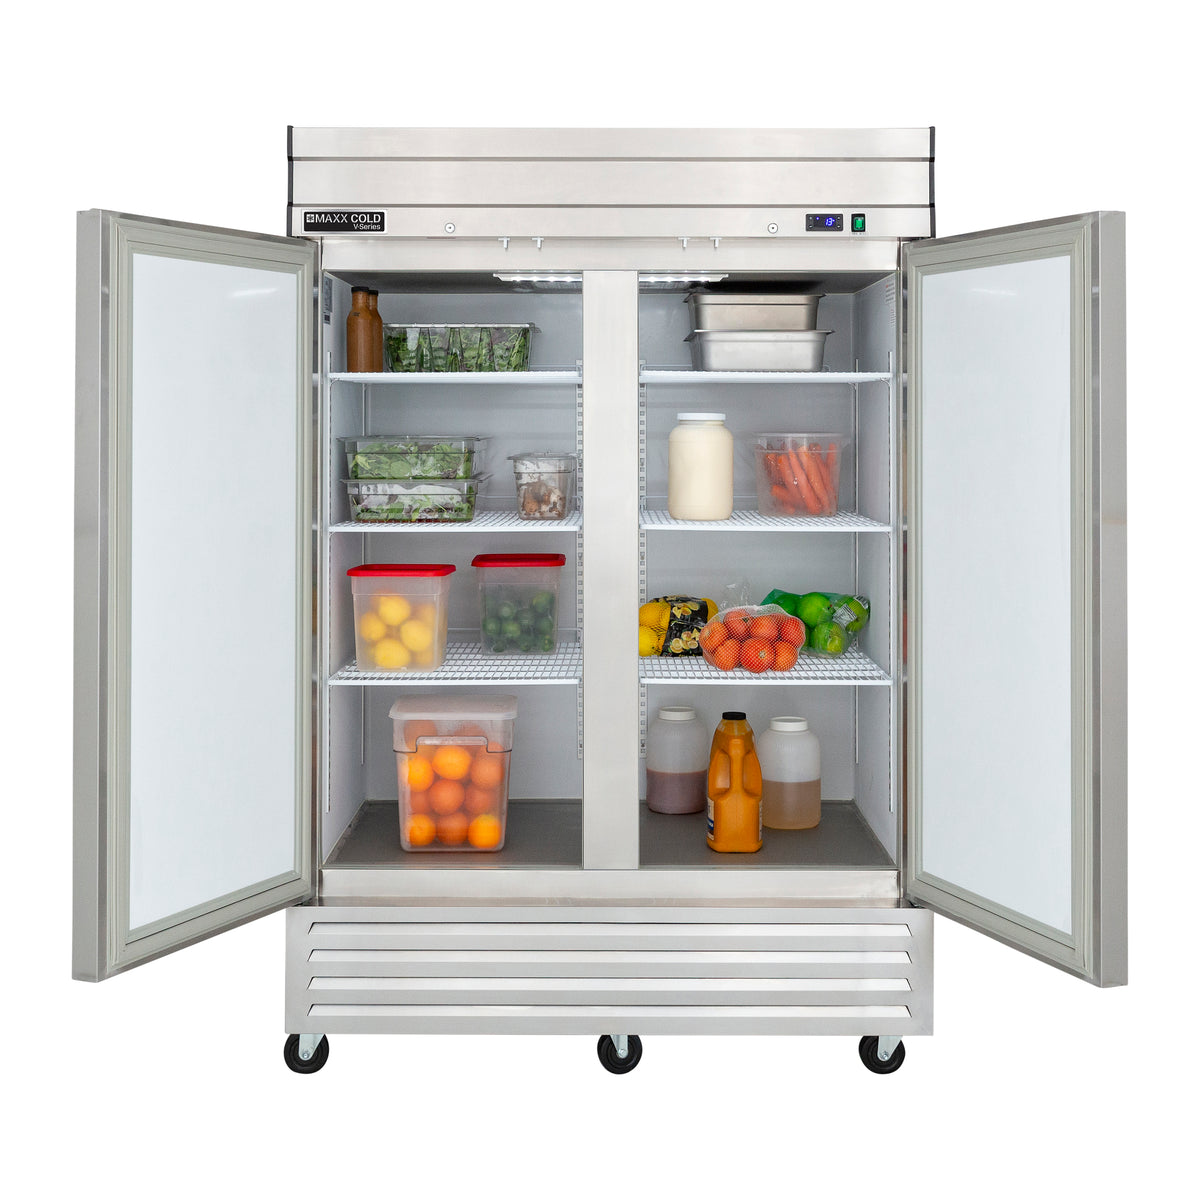 Maxx Cold MVR-49FD V-Series 2 Solid Door Reach-In Refrigerator, Bottom Mount, 54"W, 42 cu. ft. Storage Capacity, in Stainless Steel (MVR-49FDHC)